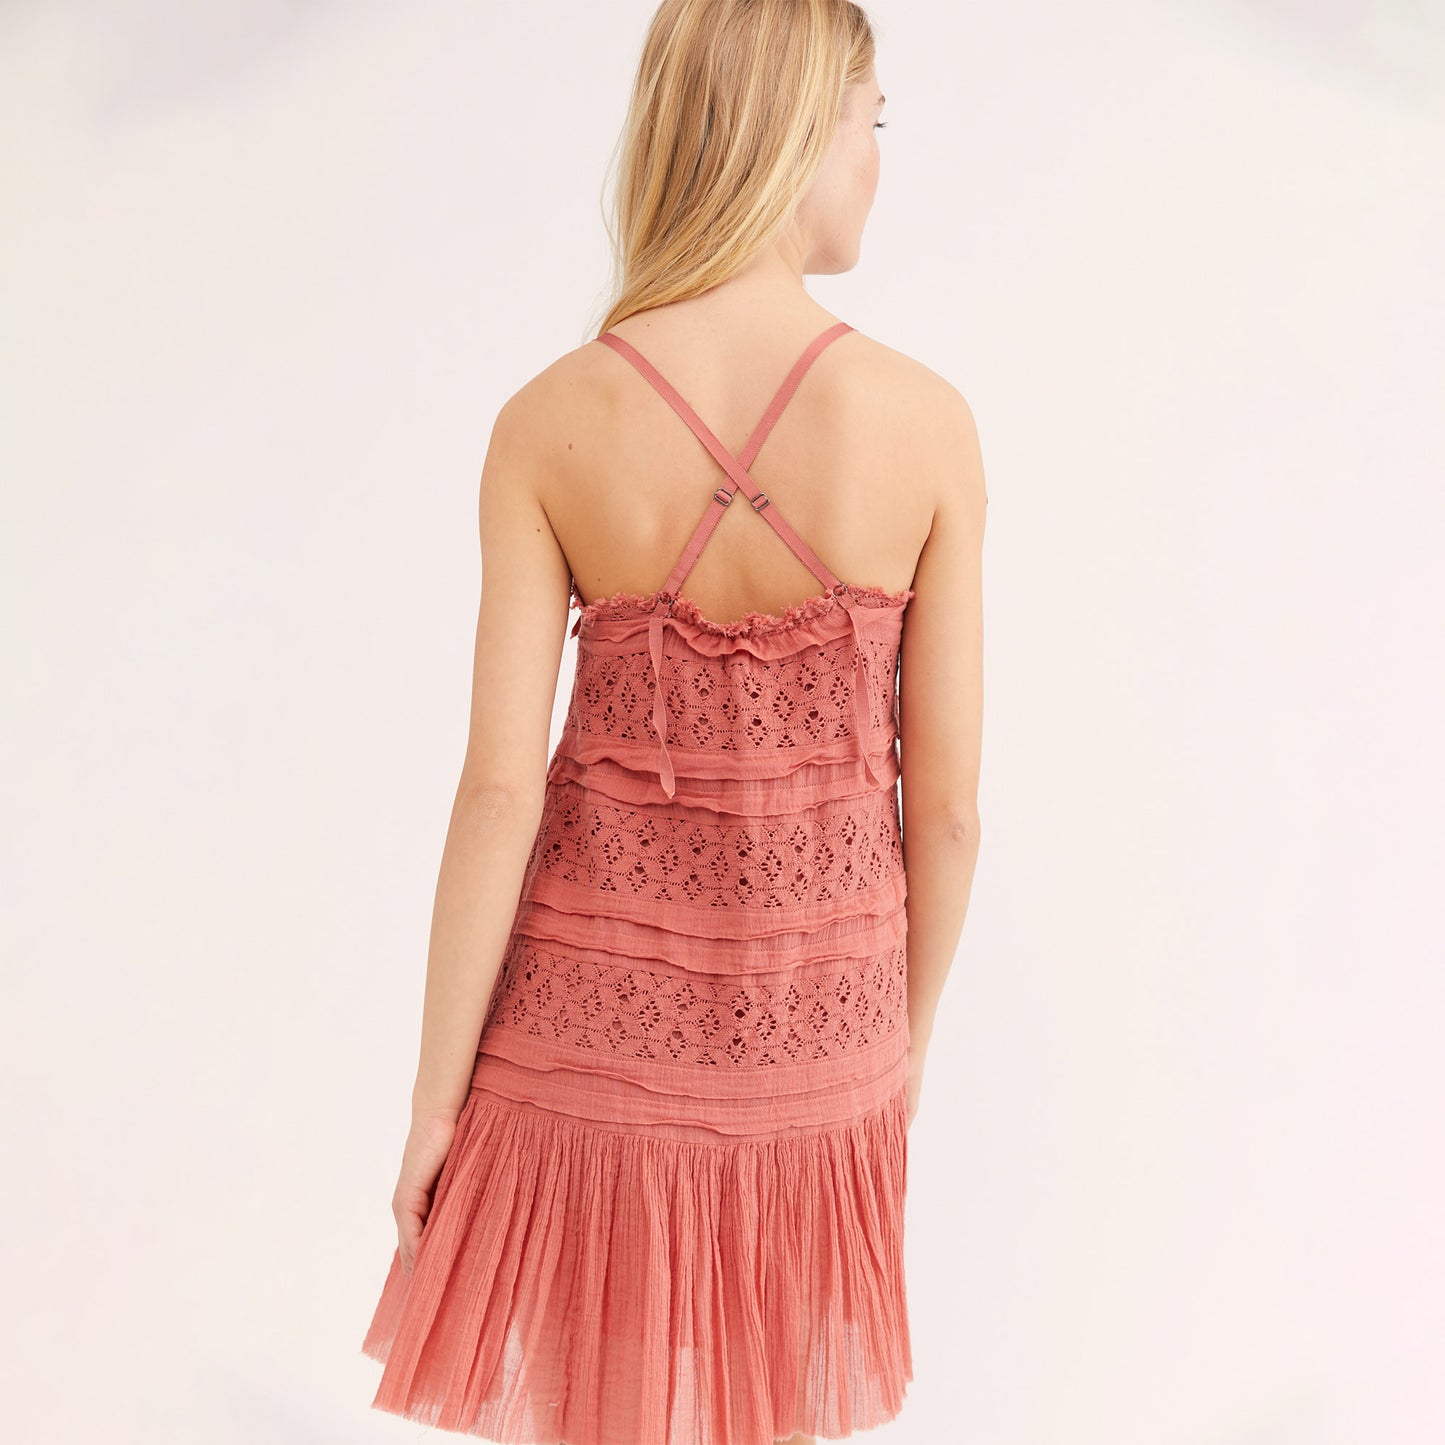 Free People Shailee Dress. This super sweet mini slip will give your look that feminine touch. Featuring a tiered detail, flowy silhouette, crochet lace paneling, gauzy ruffled skirt, adjustable straps, straight neckline, and a mini length. Style this piece with lots of jewlery and lace up sandals for the most romantic look!